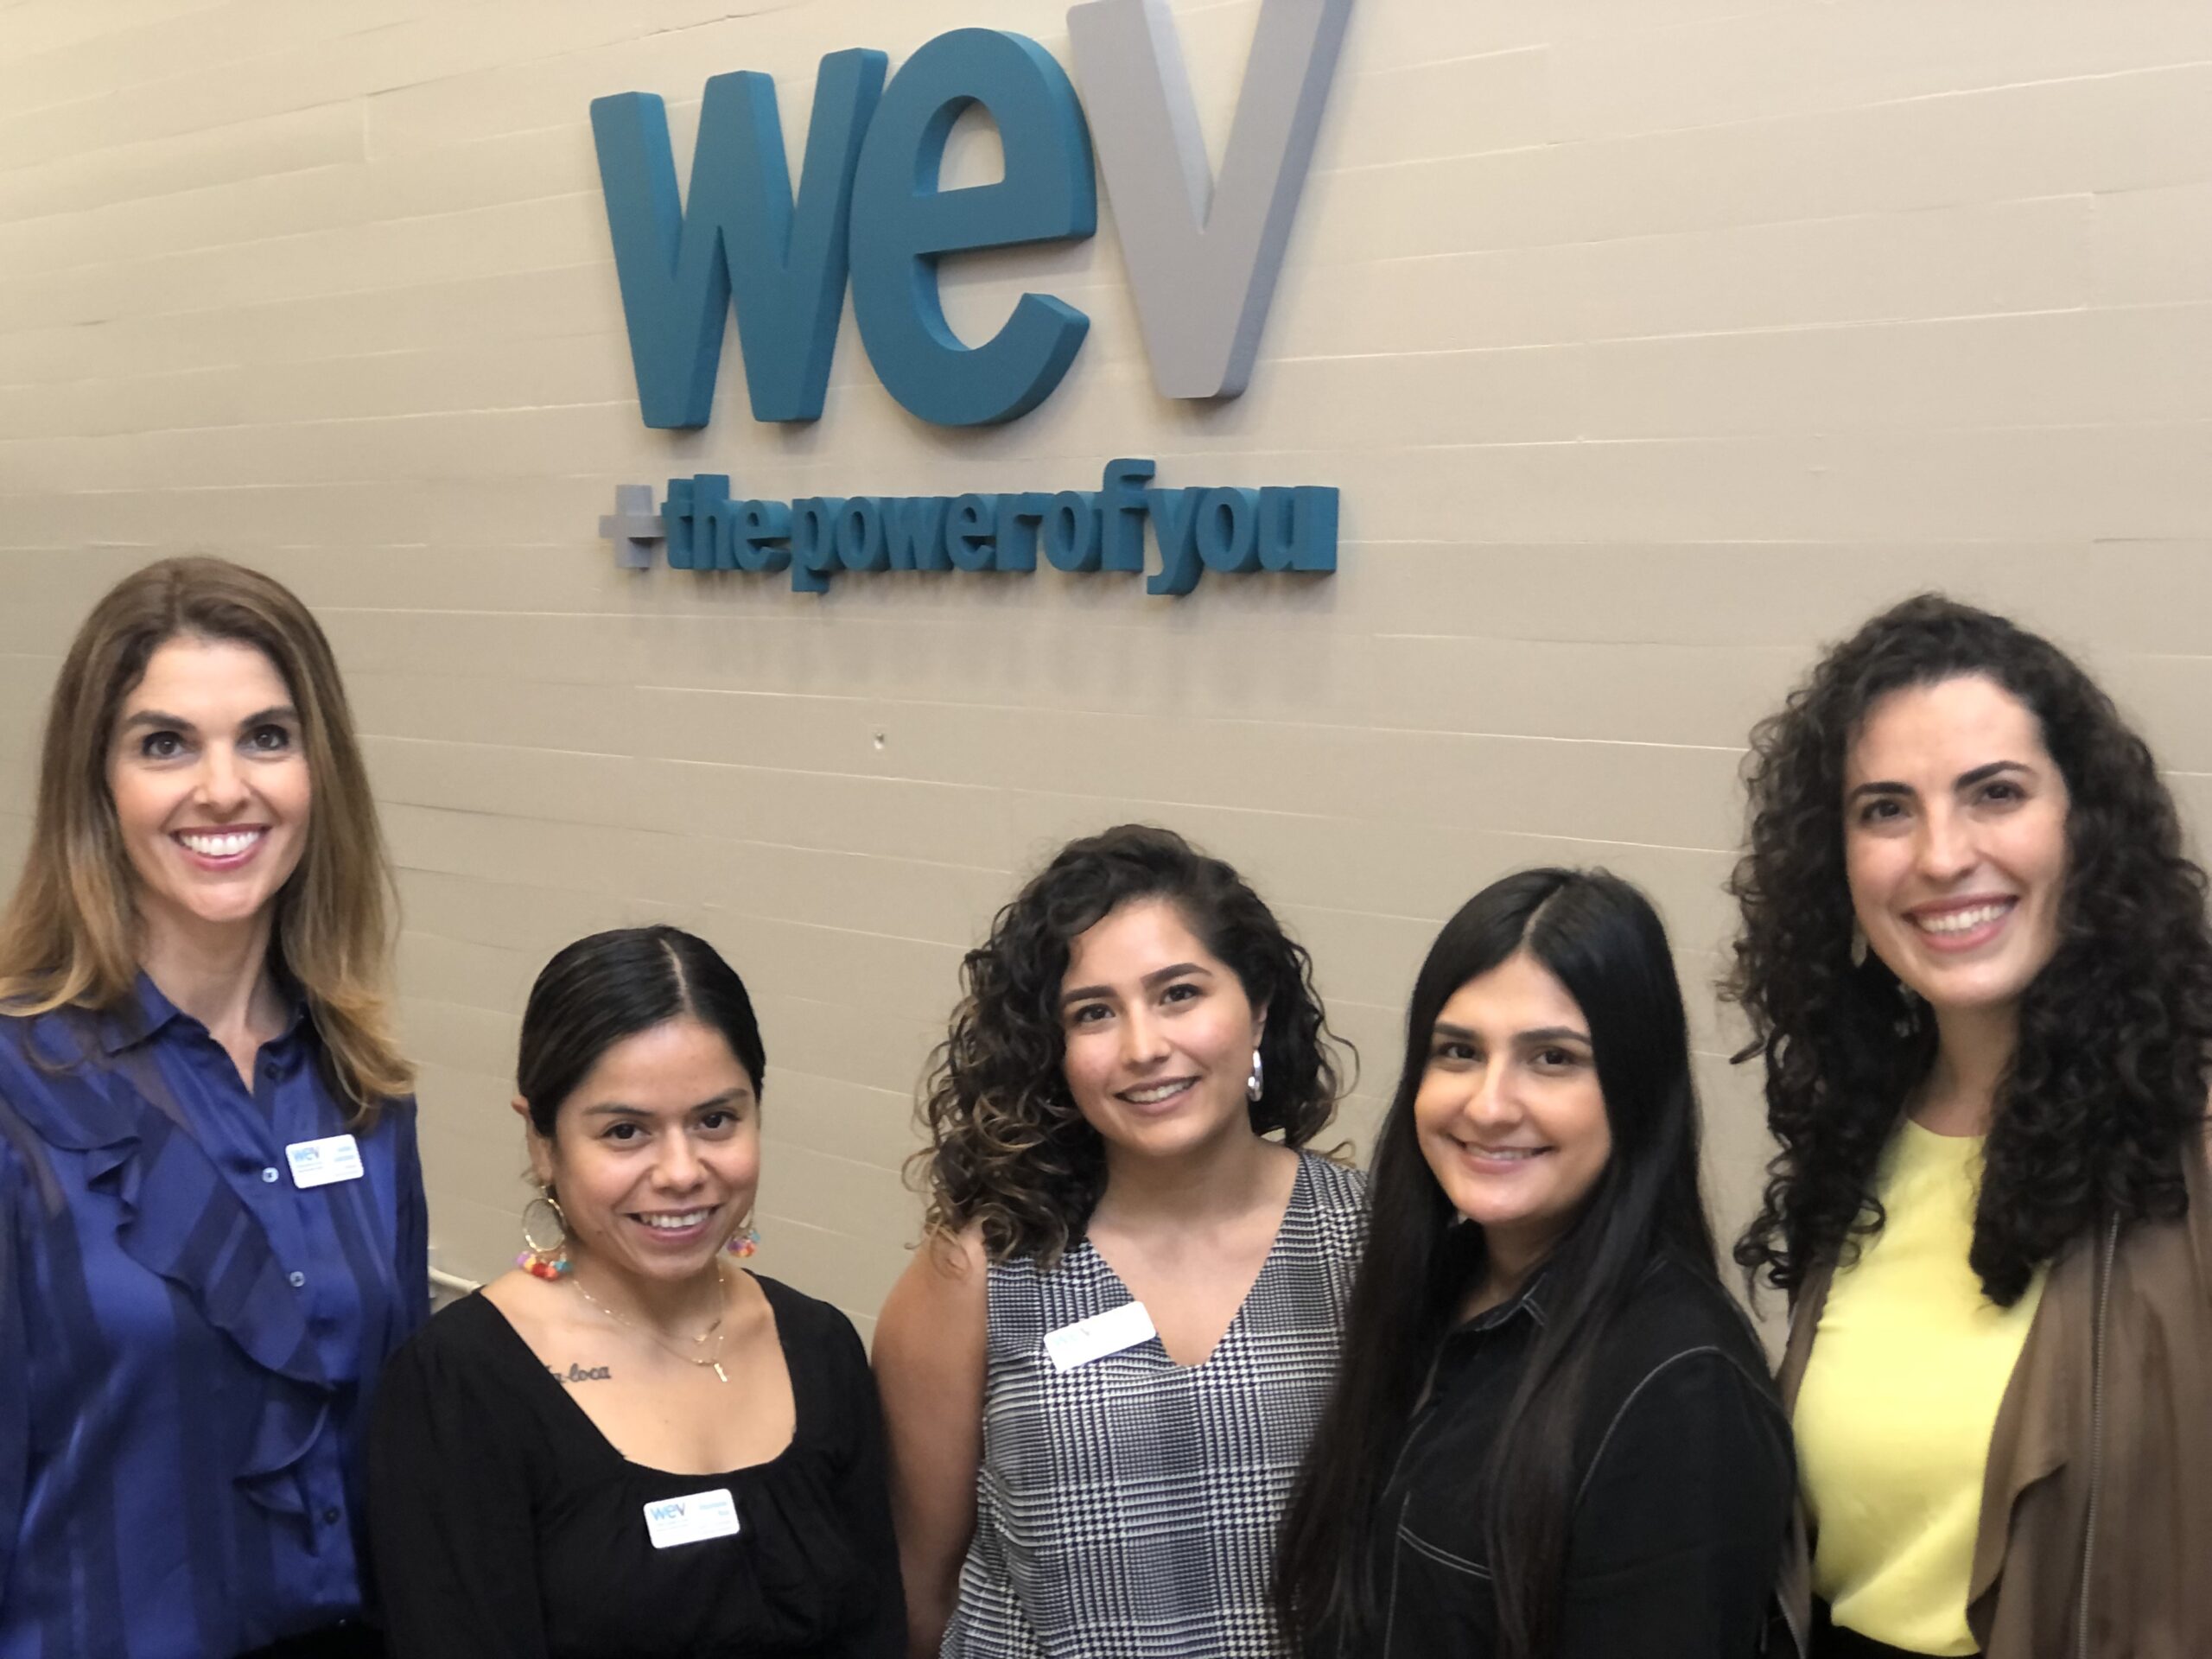 WEV staff members gather for the open house.